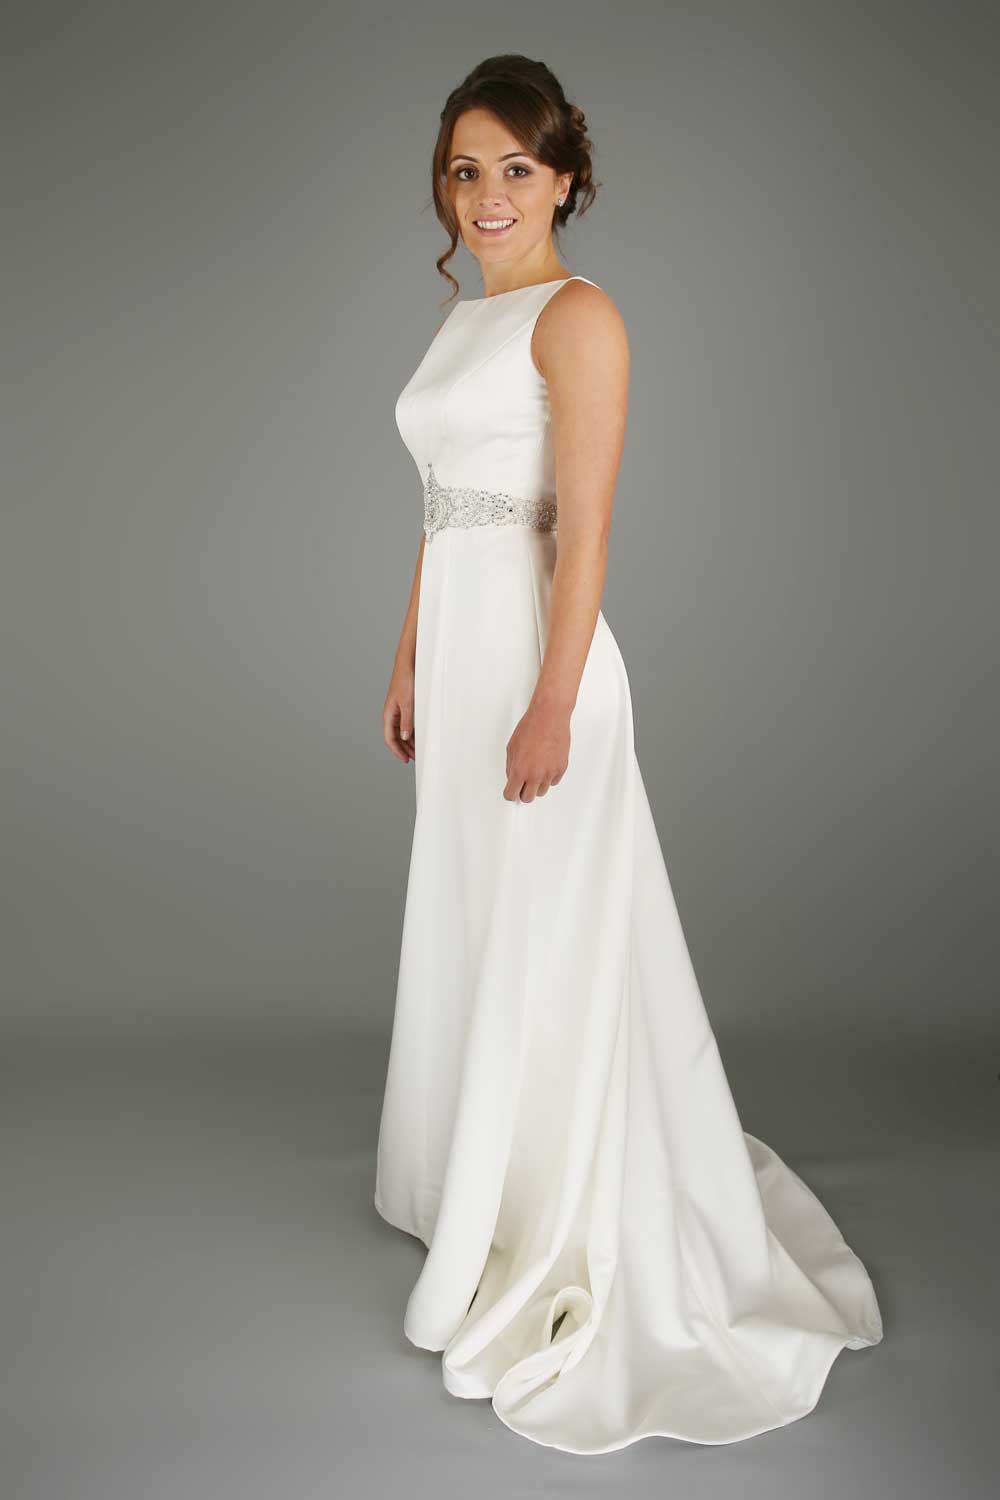 Draping wedding gown with bateau neckline